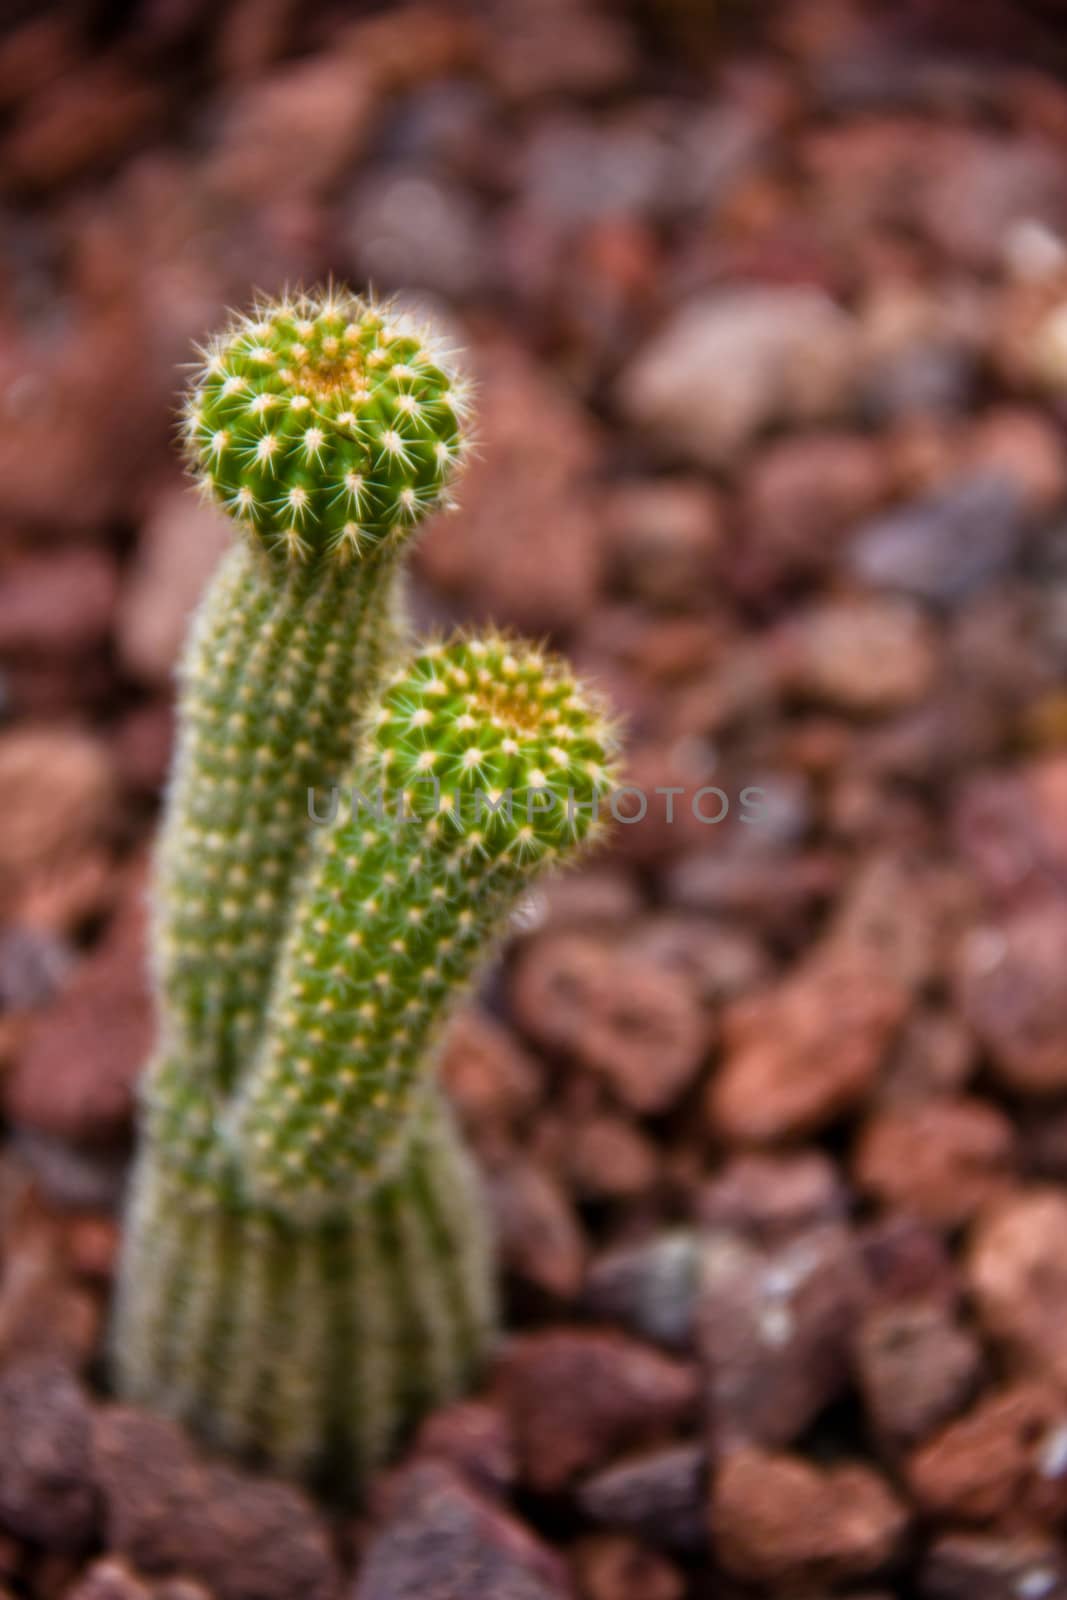 cactus by marco_govel